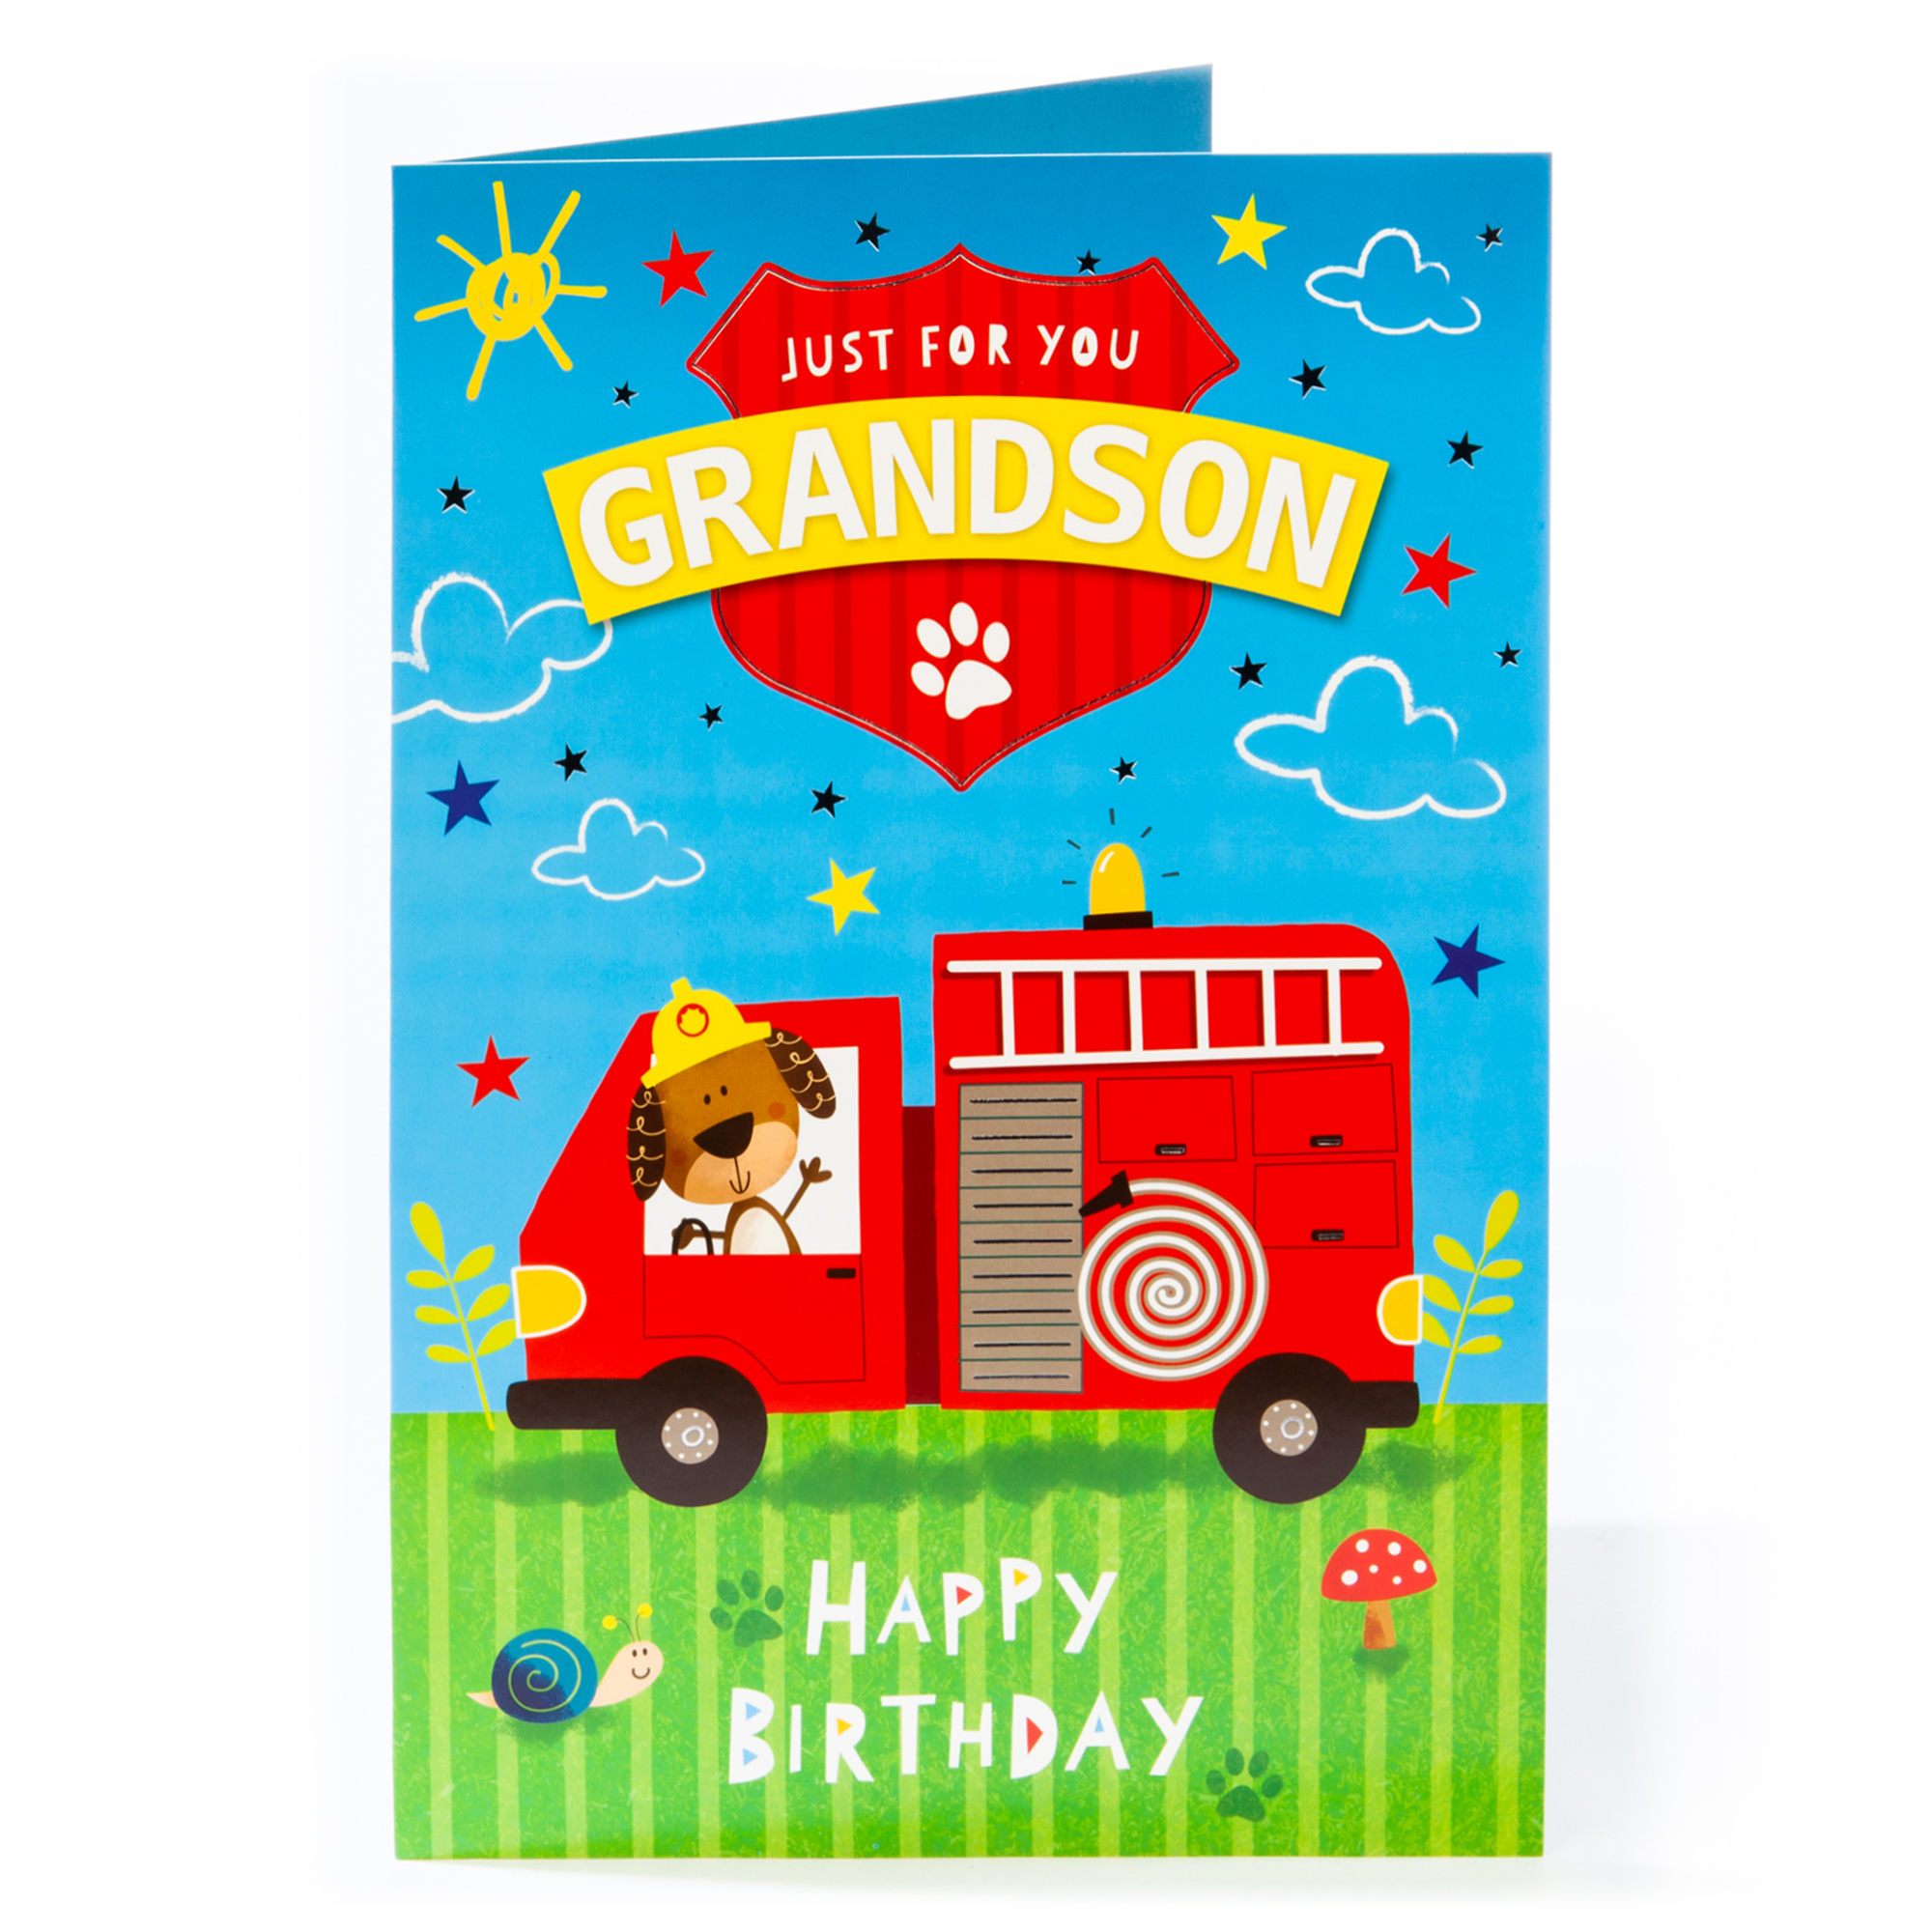 Giant Birthday Card - For You Grandson